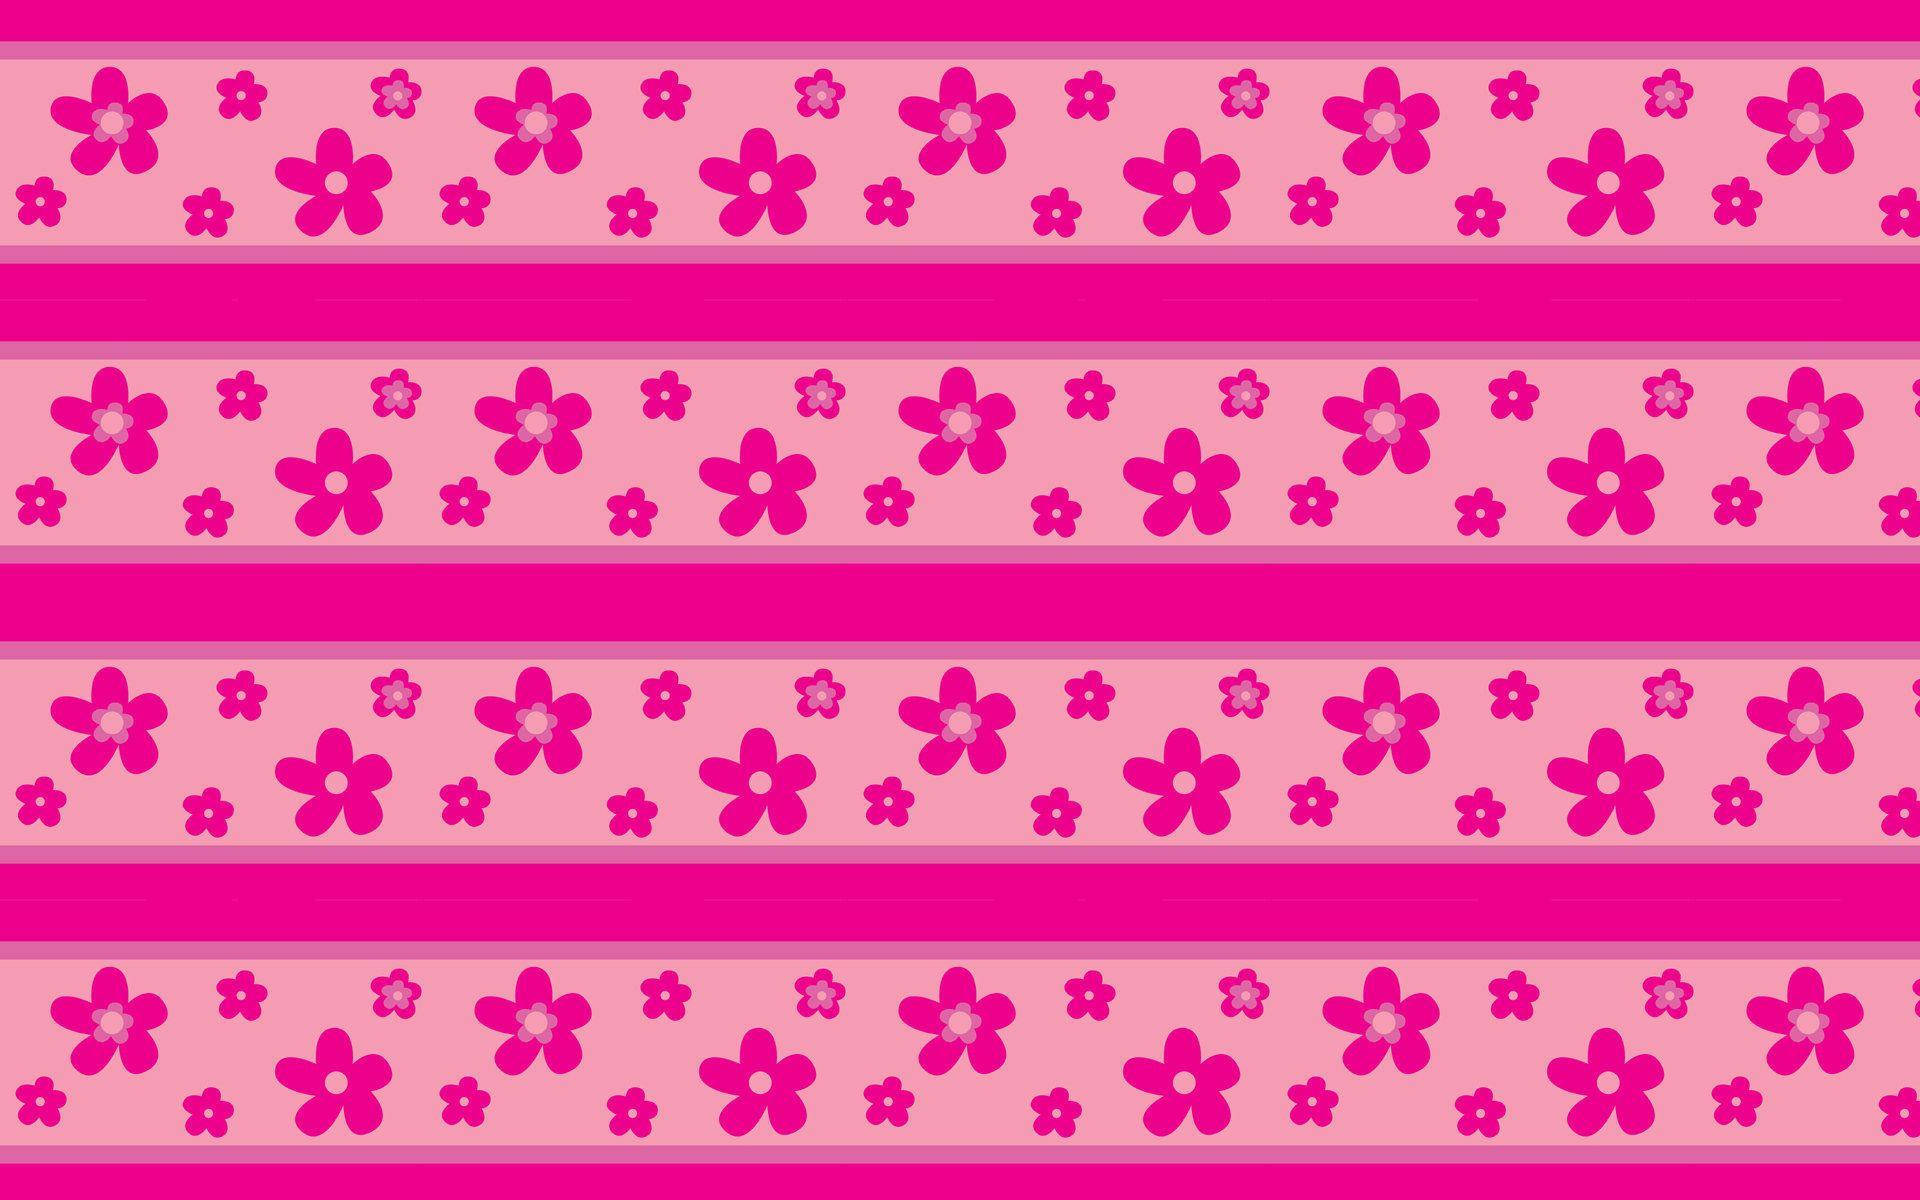 Vibrant Hot Pink Flower Amidst Lines Pattern Background